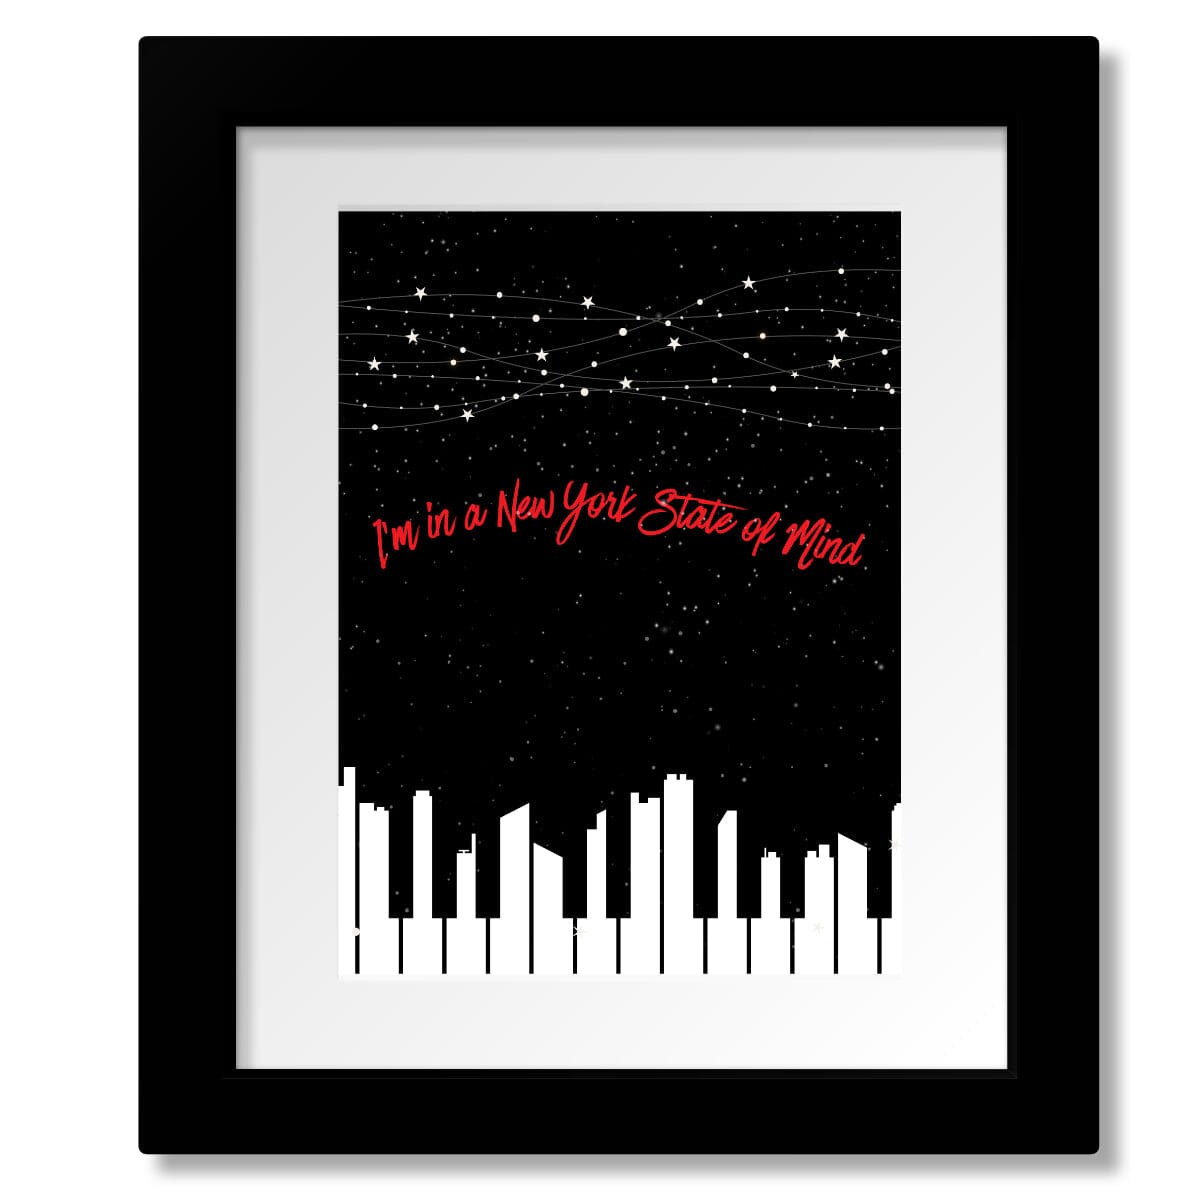 New York State of Mind by Billy Joel - Song Lyrics Art Print Song Lyrics Art Song Lyrics Art 8x10 Framed and Matted Print 